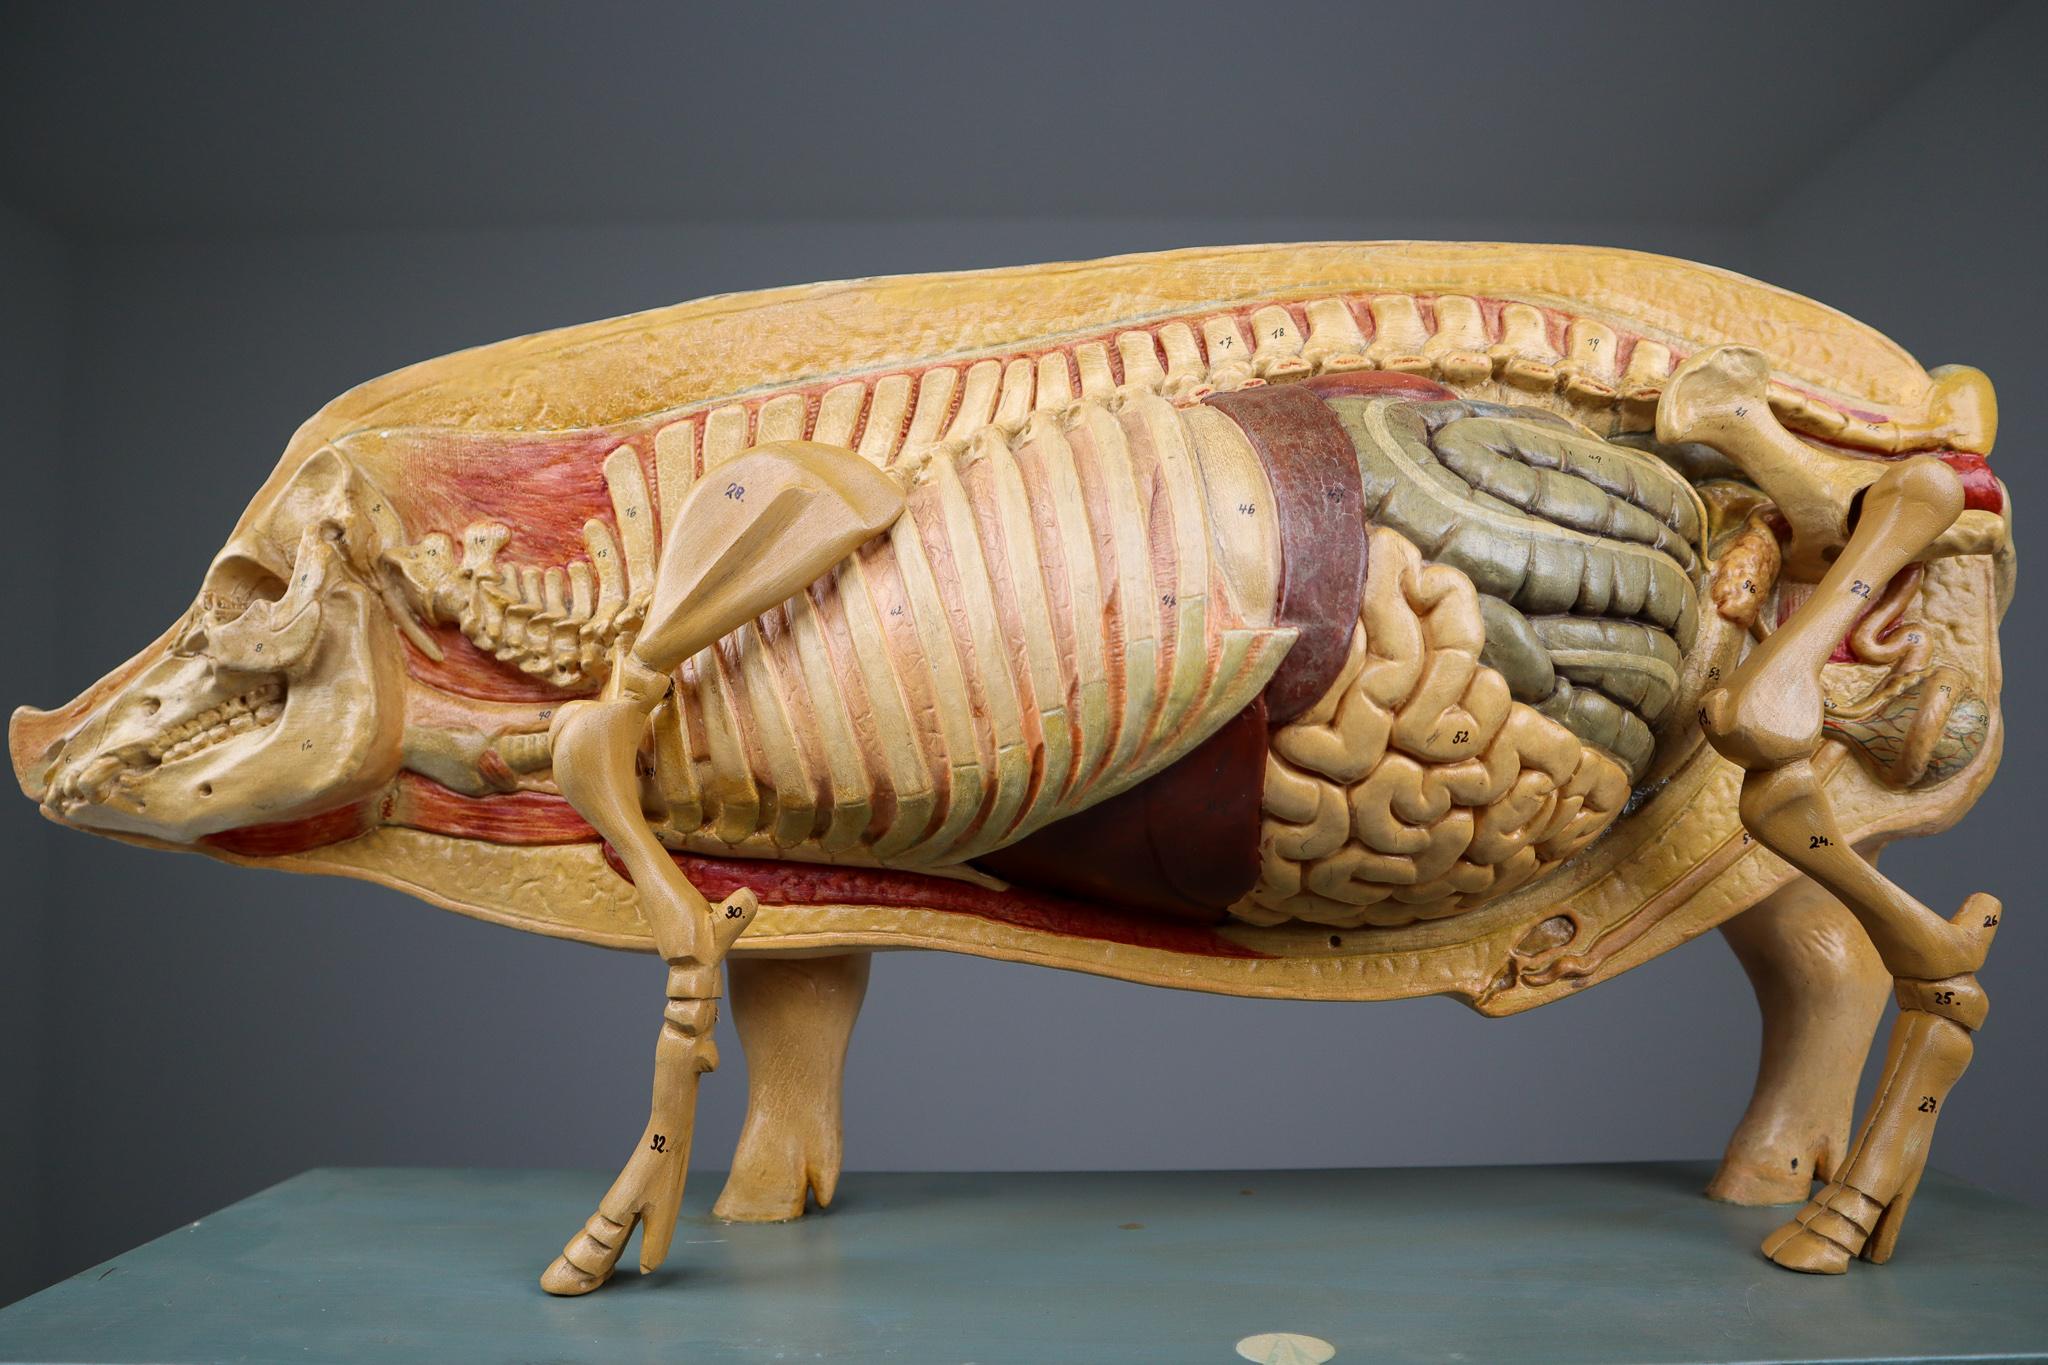 This anatomical pig model is unsigned but we believe it is by the German model maker Somso. The left side shows the hide right side the skeleton and abdominal organs. skeletons of the fore and hind extremities are removable. altogether into 3 parts.